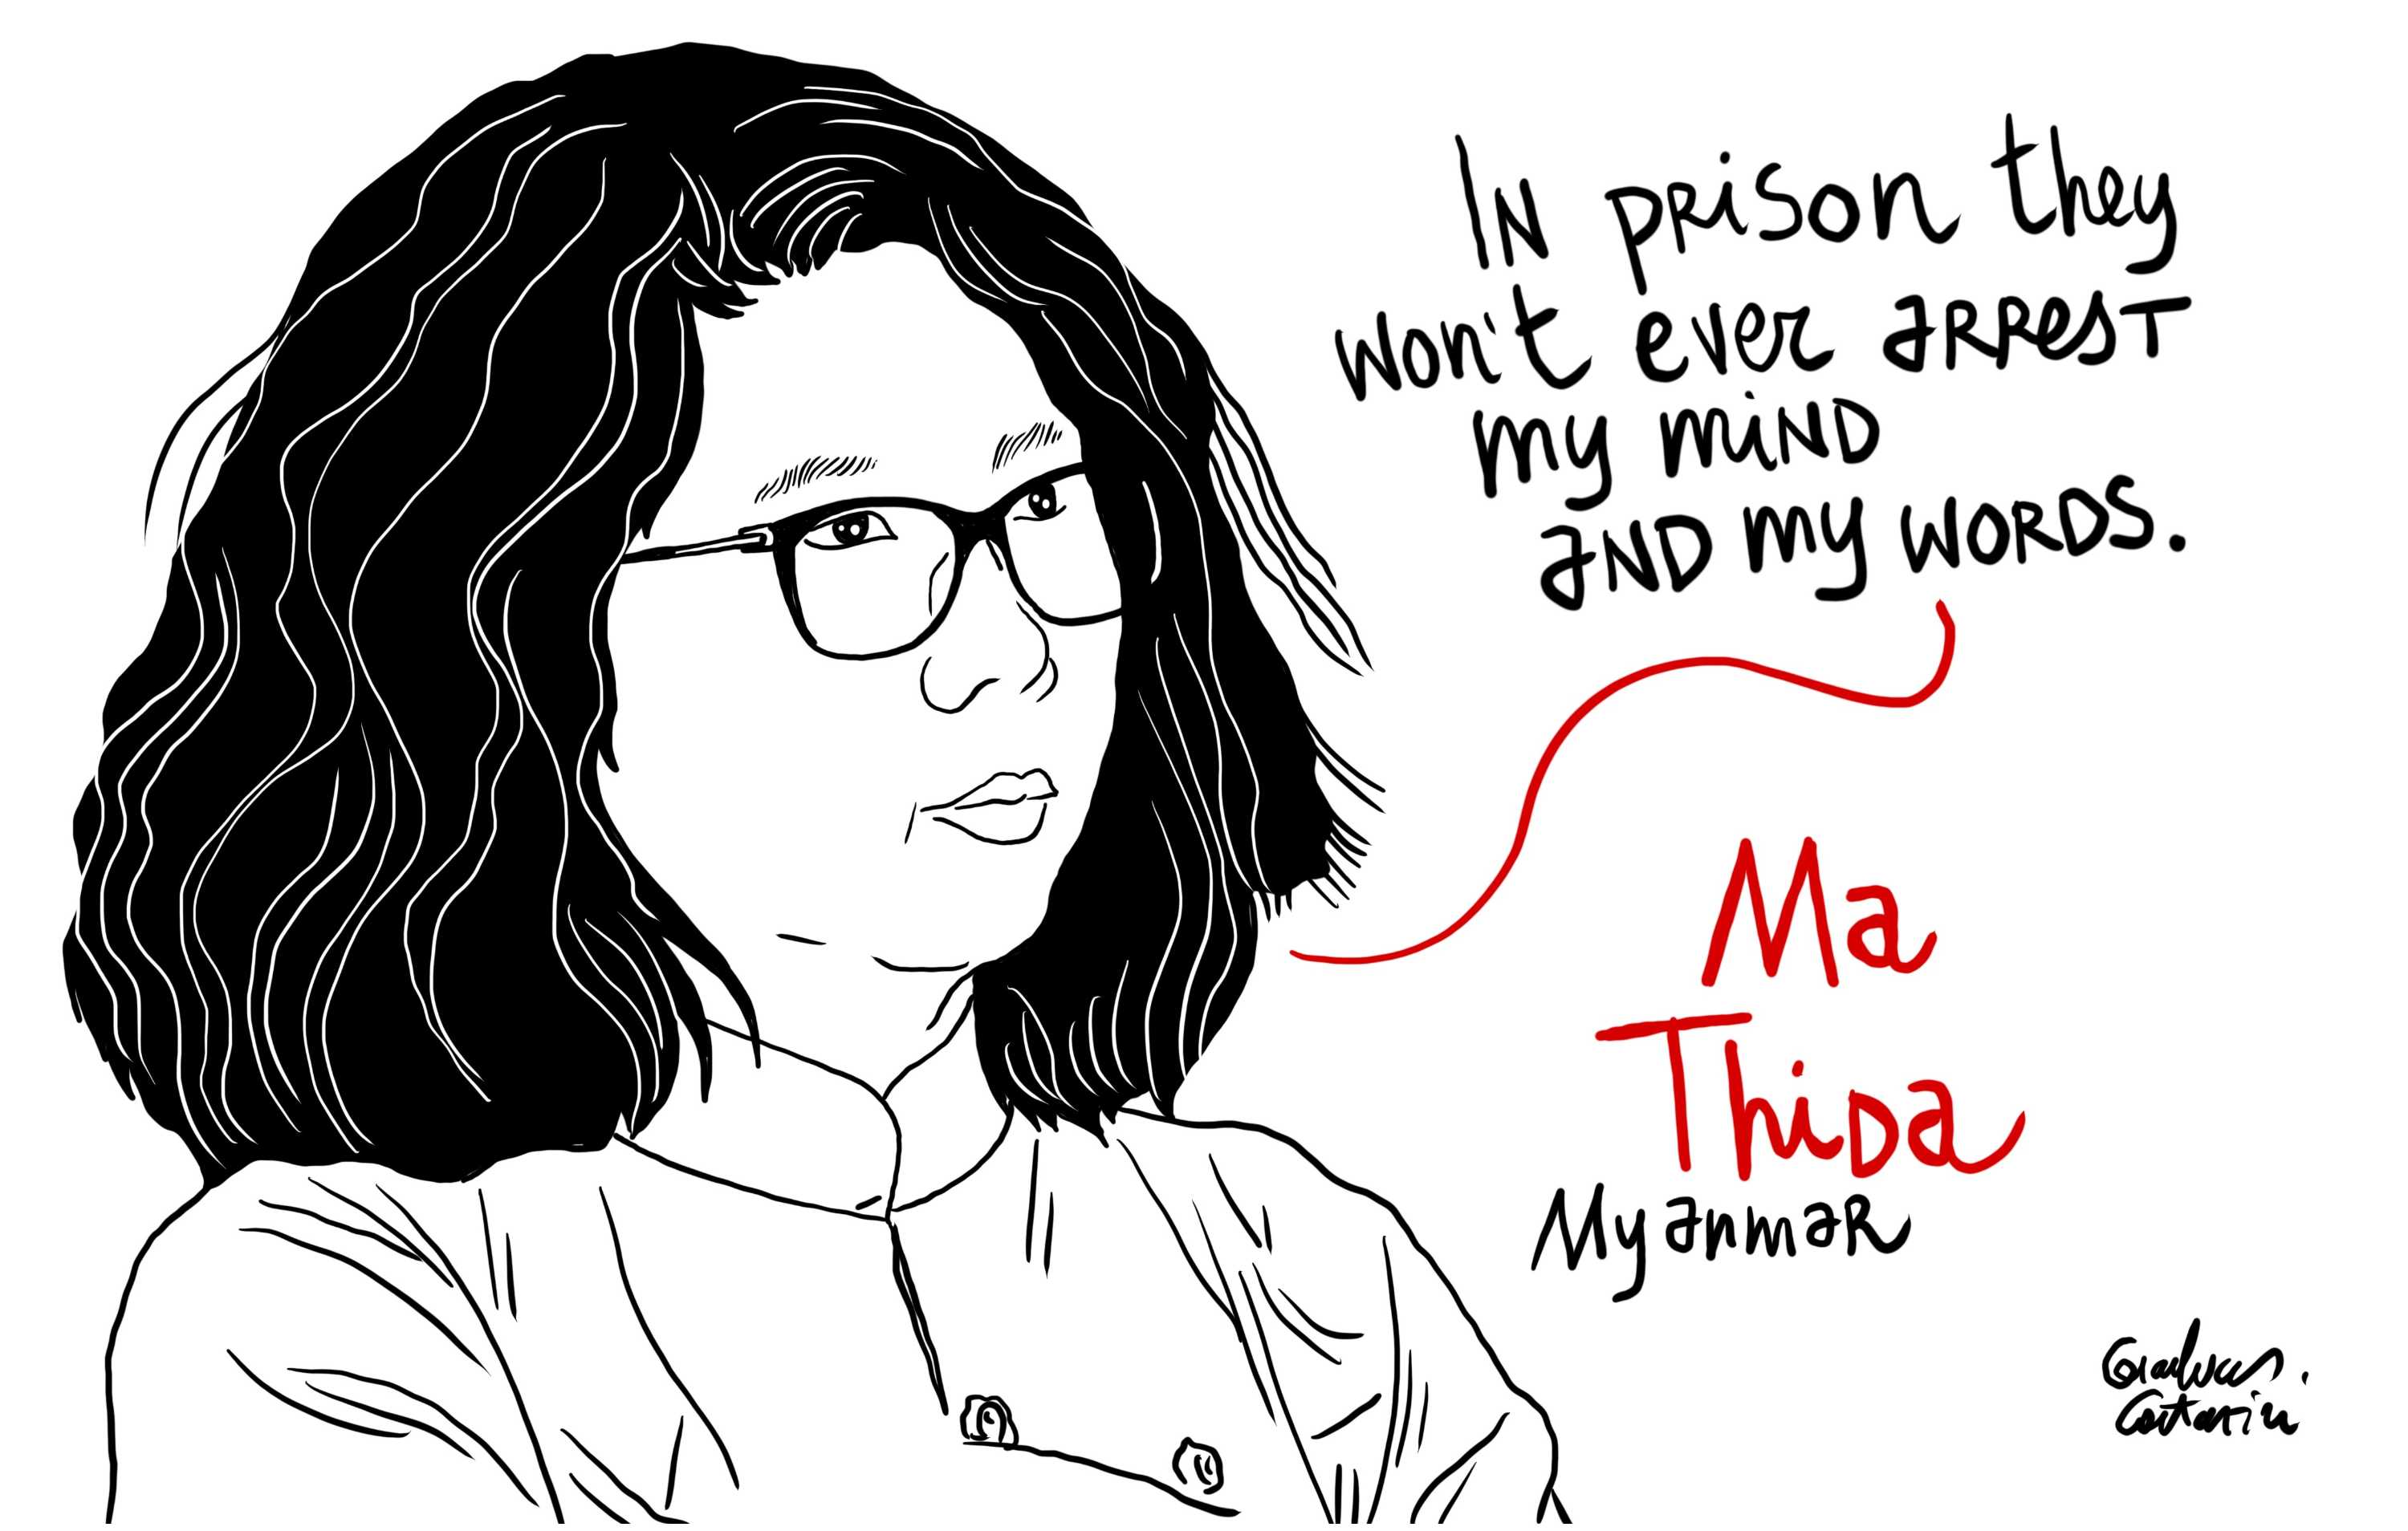 You are not alone - Ma Thida prisoner of conscience